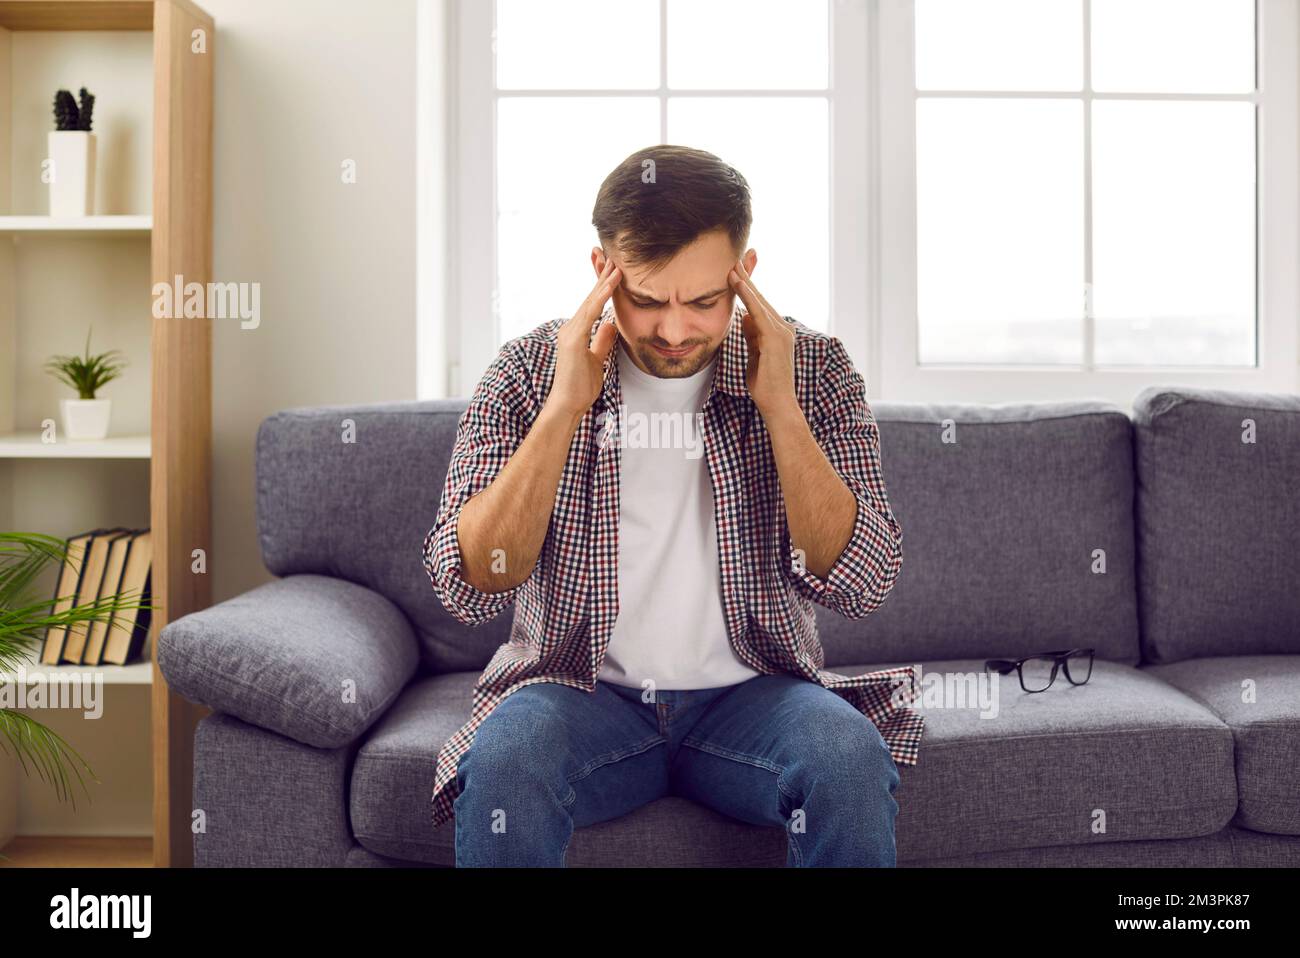 Young man rubbing his temples suffers from migraines while sitting on the couch at home. Stock Photo